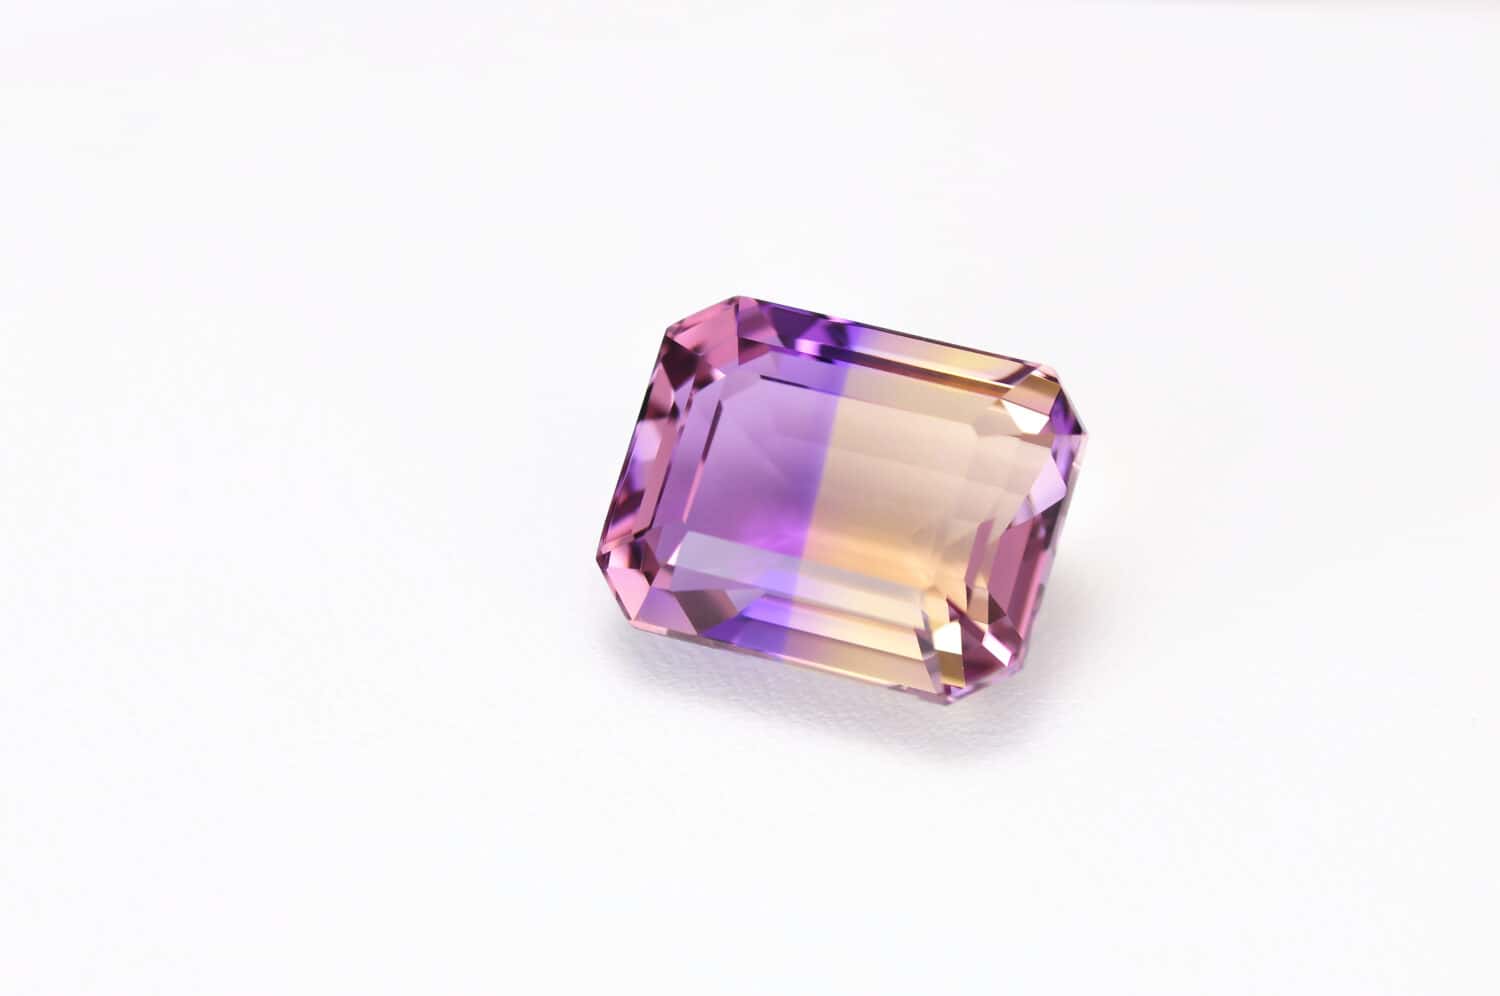 Loose natural bicolor: purple and yellow, Bolivian ametrine emerald cut faceted gemstone on white leather textured background